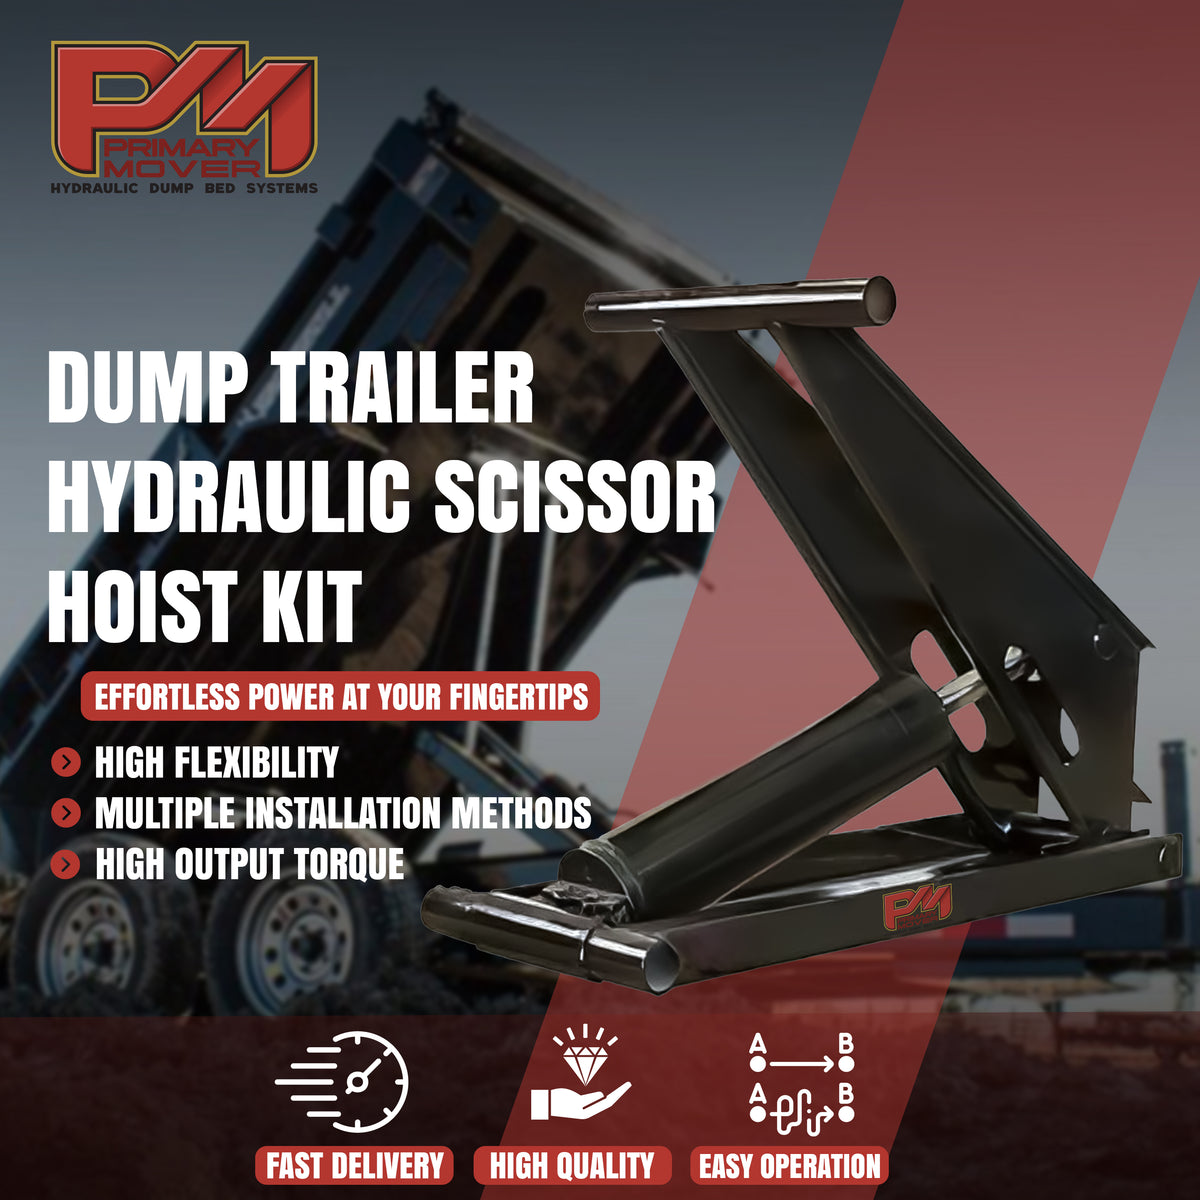 Hydraulic Scissor Hoist Kit - 10 Ton Capacity - Fits 12-16' Dump Body | PF-520: Black metal lifter with text, red and white accents, and logo. Includes cylinder, mounting brackets, hydraulic pump, safety features.